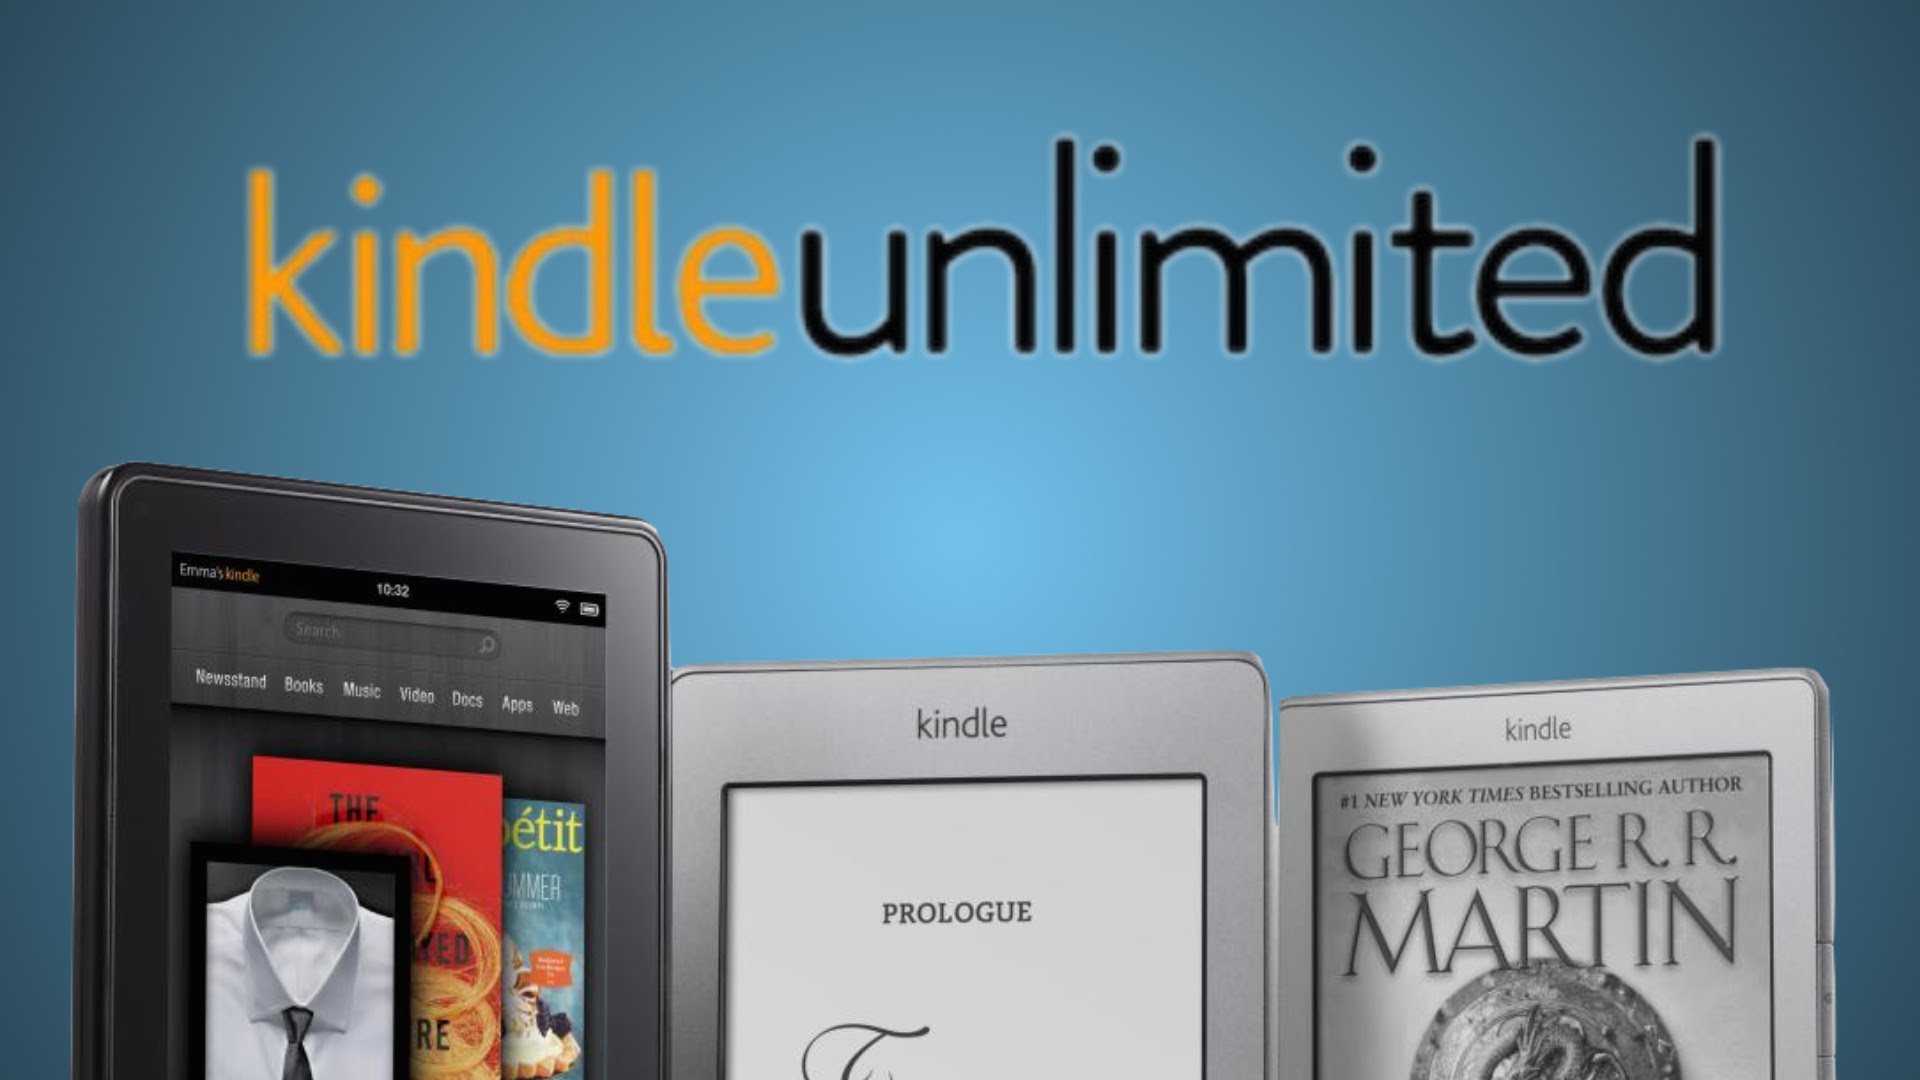 Read all you can for FREE w/ 3months of Amazon Kindle Unlimited (30